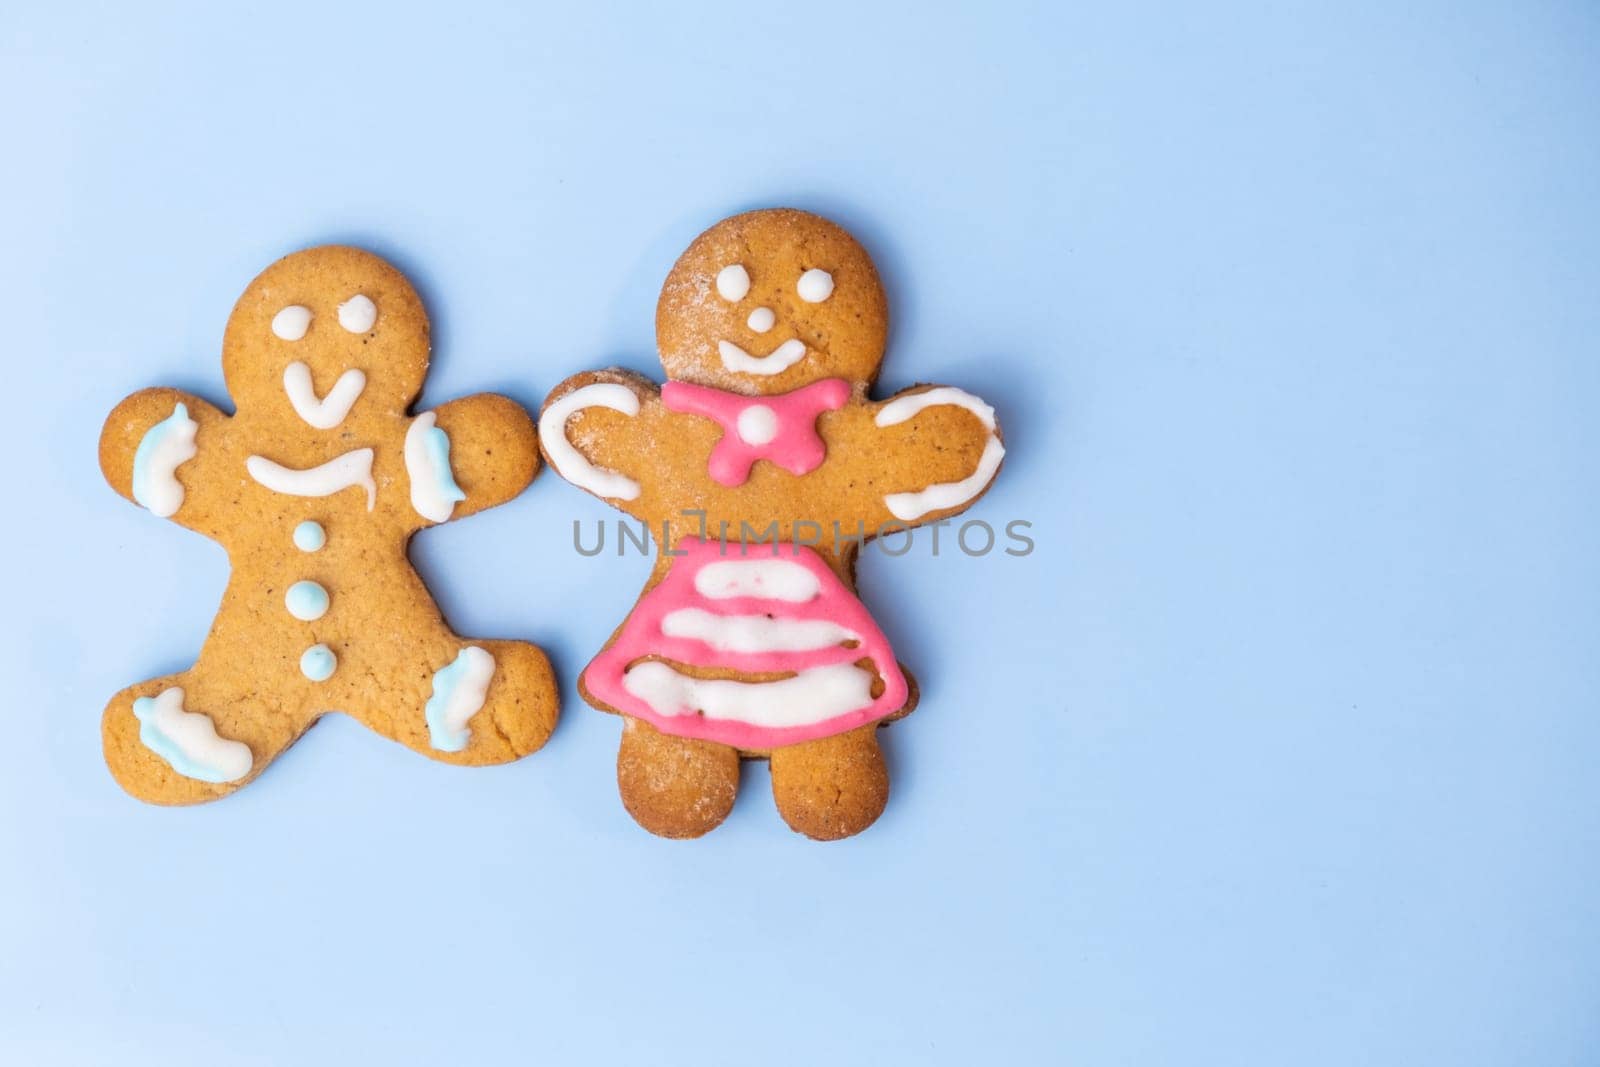 Boy and black girl gingerbread couplet on the blue background with copy space for St Valentines Day.